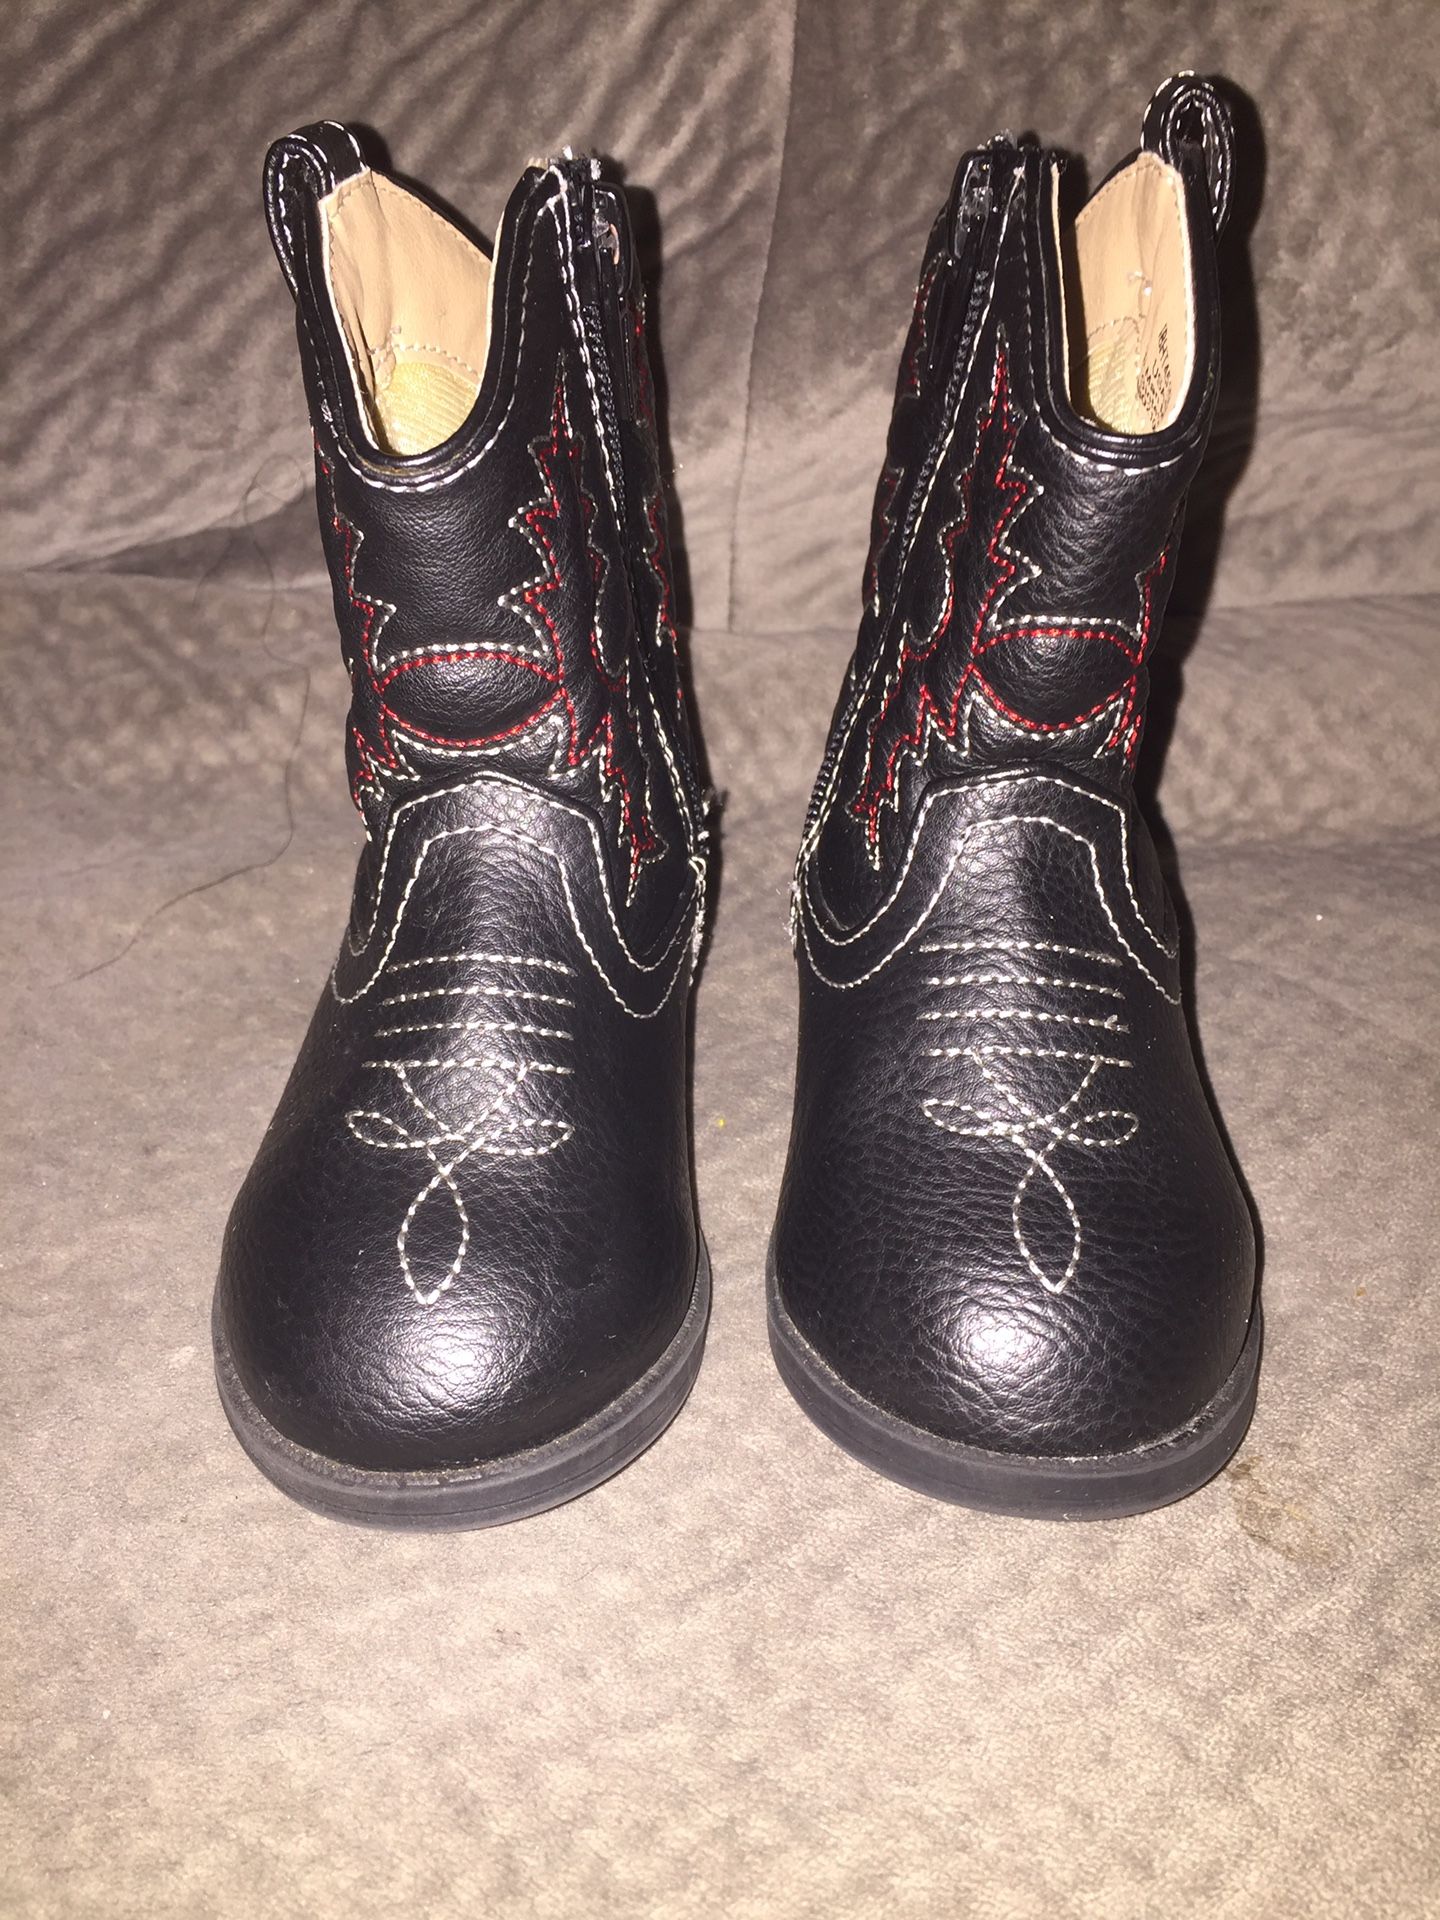 Healthtex boots size 5 Toddler